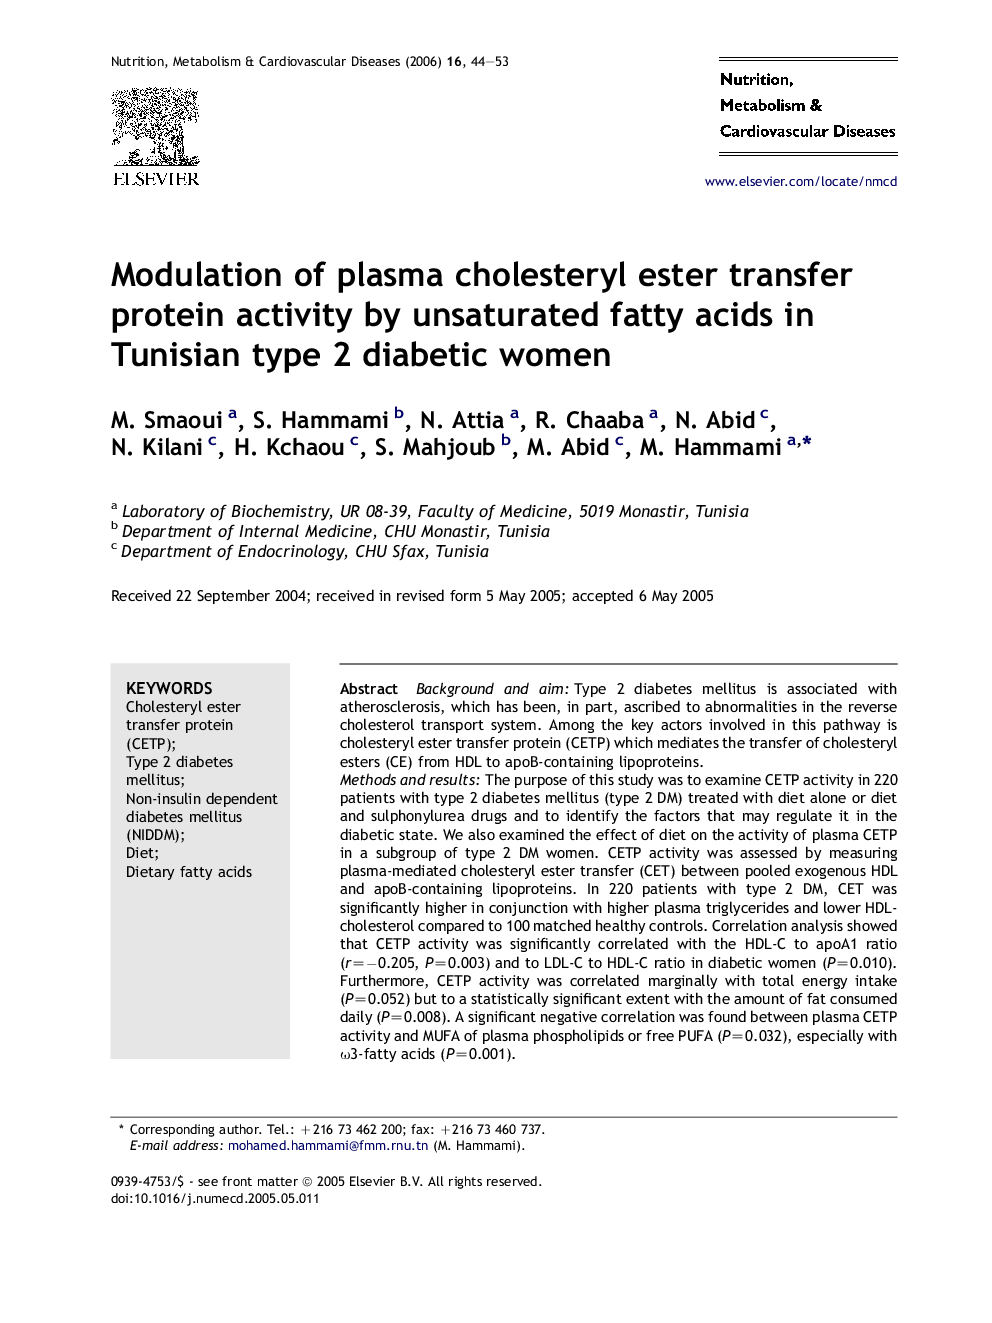 Modulation of plasma cholesteryl ester transfer protein activity by unsaturated fatty acids in Tunisian type 2 diabetic women